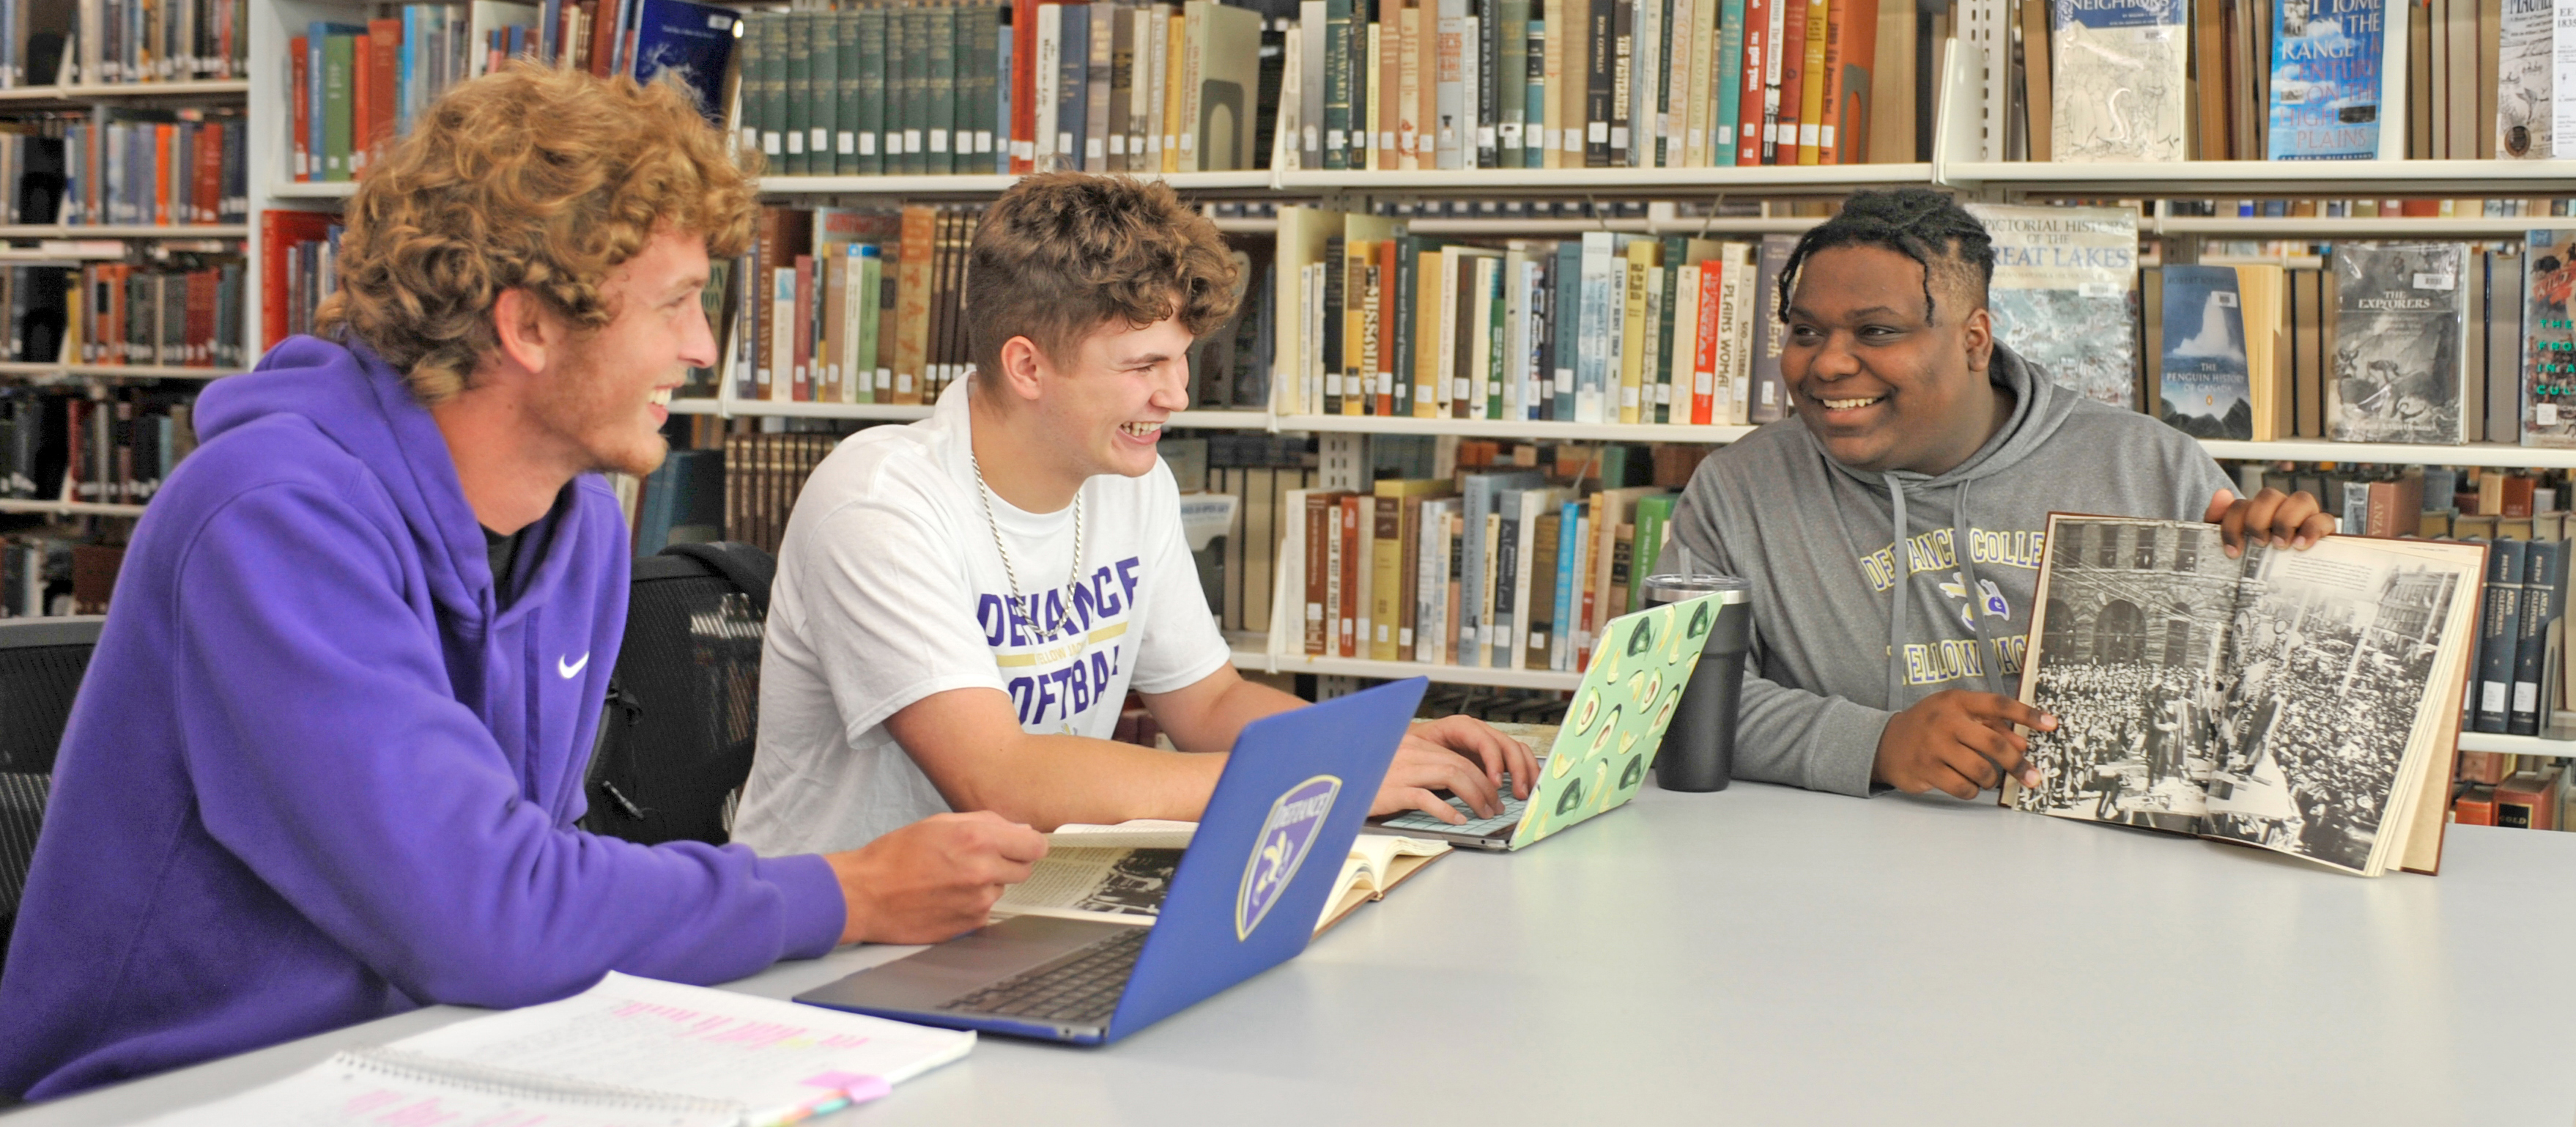 three students at a desk in the library smiling and looking at a book